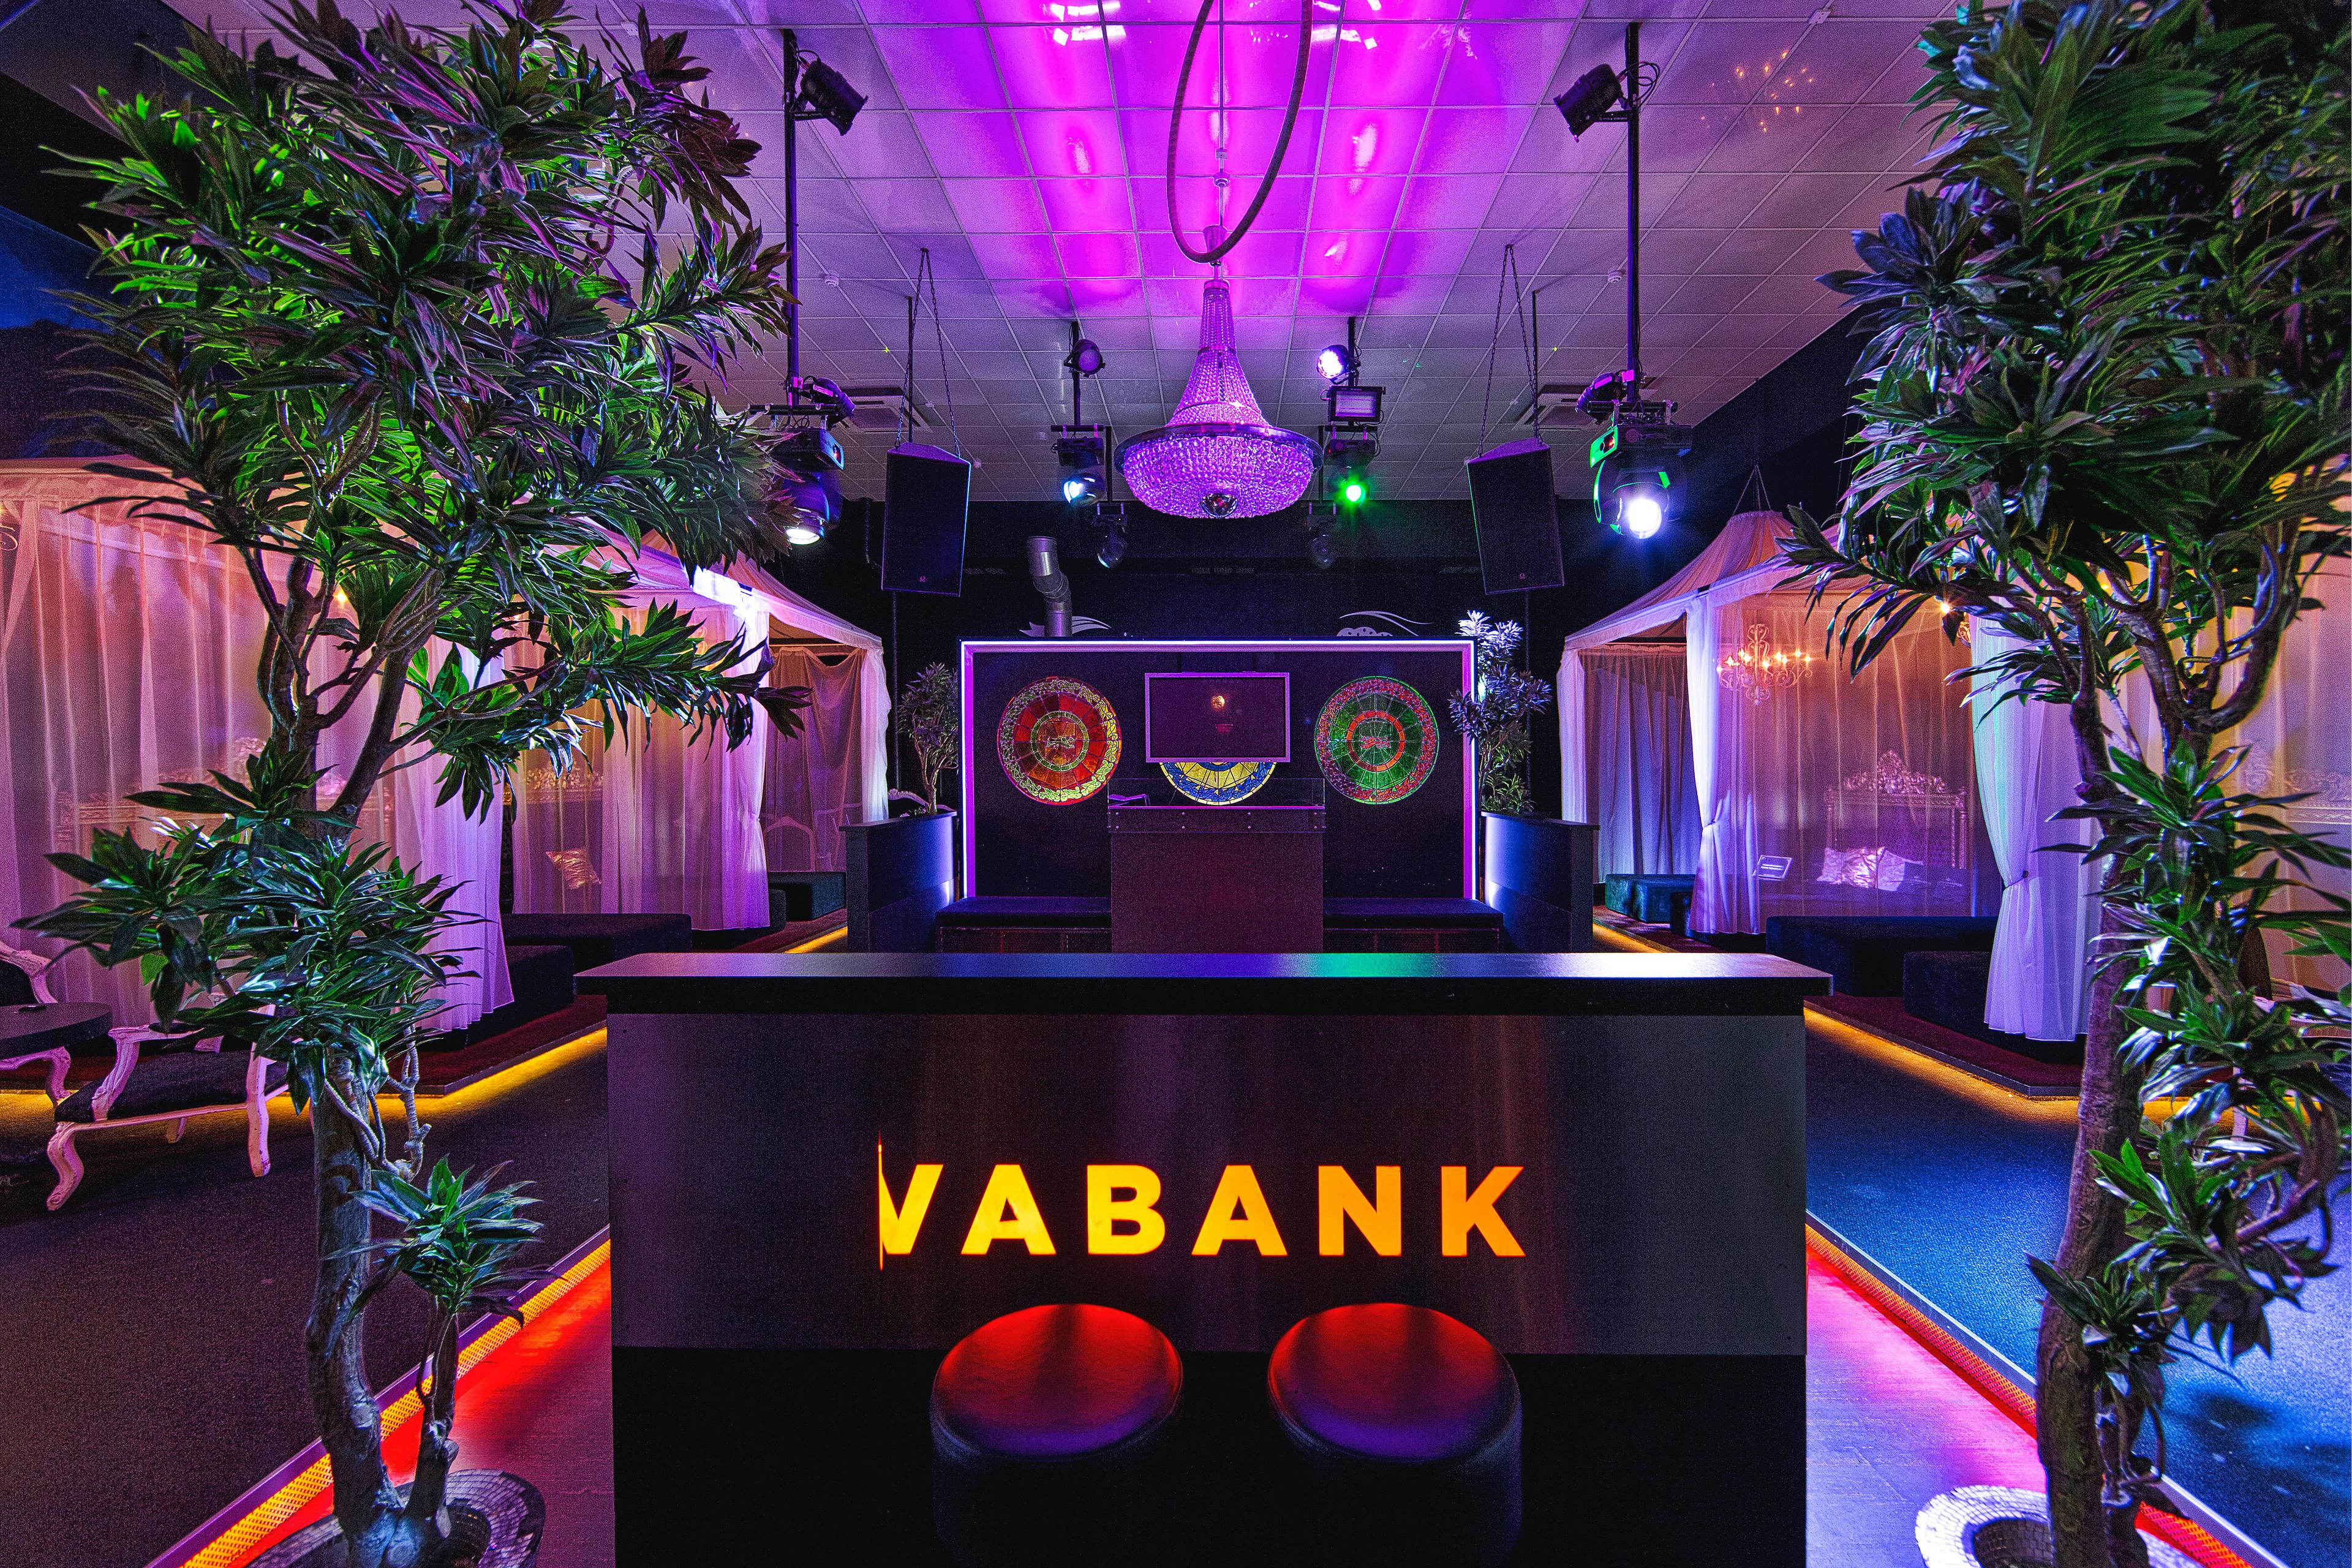 Cover image of this place Vabank